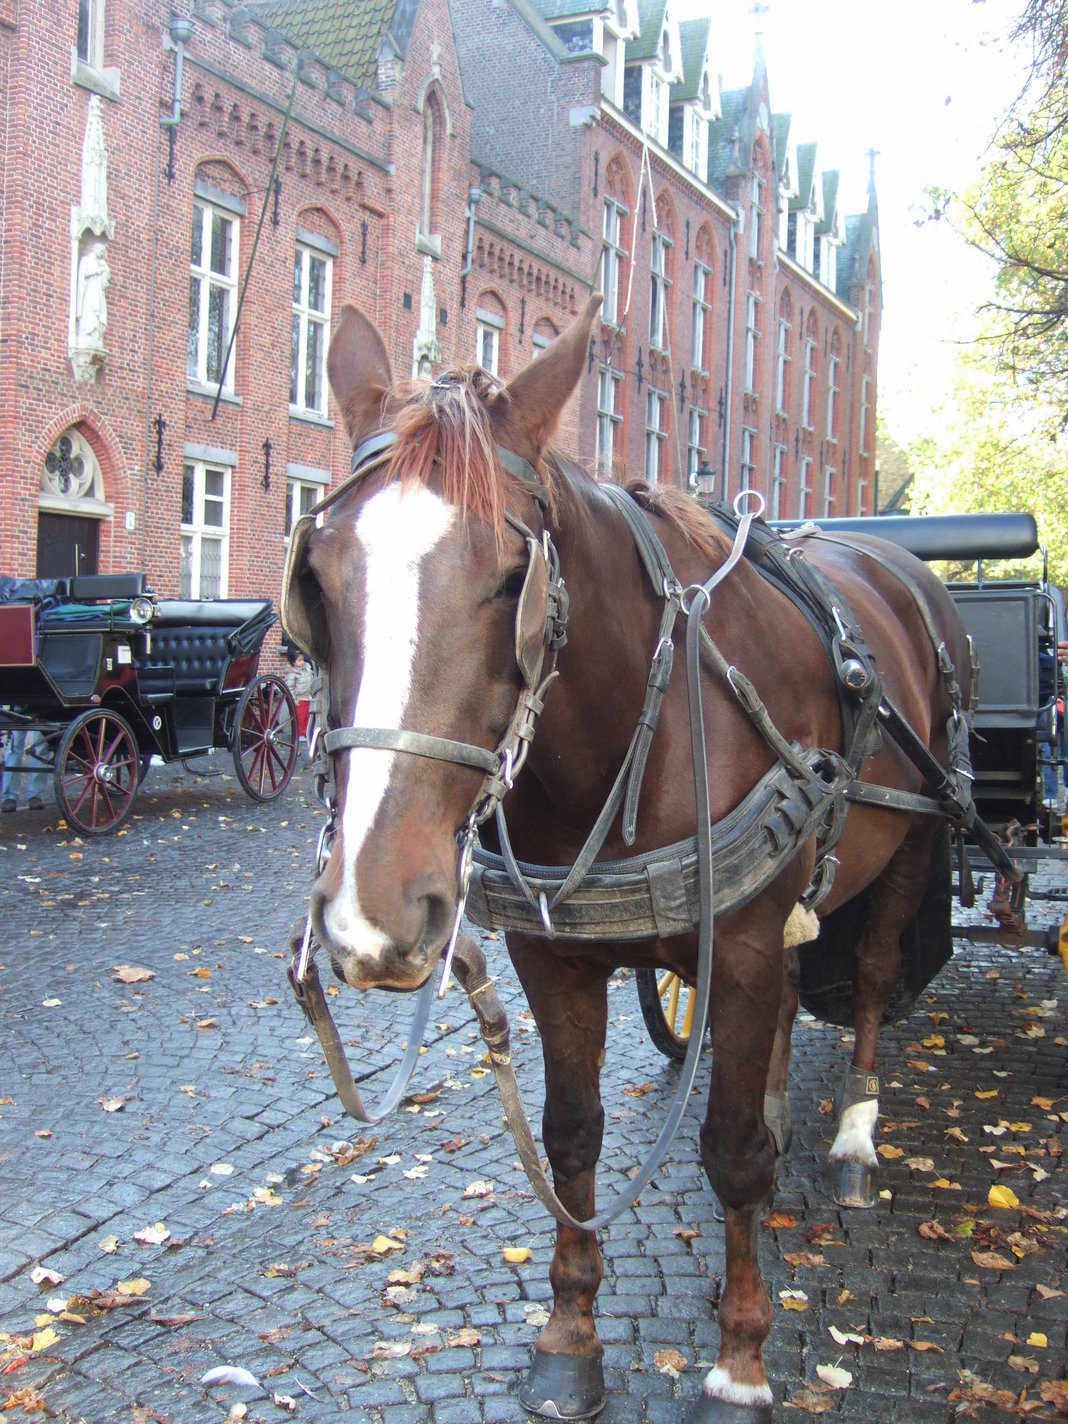 Horse Carriage, Horse | Carriage | Brown | City | Brugges | Transport